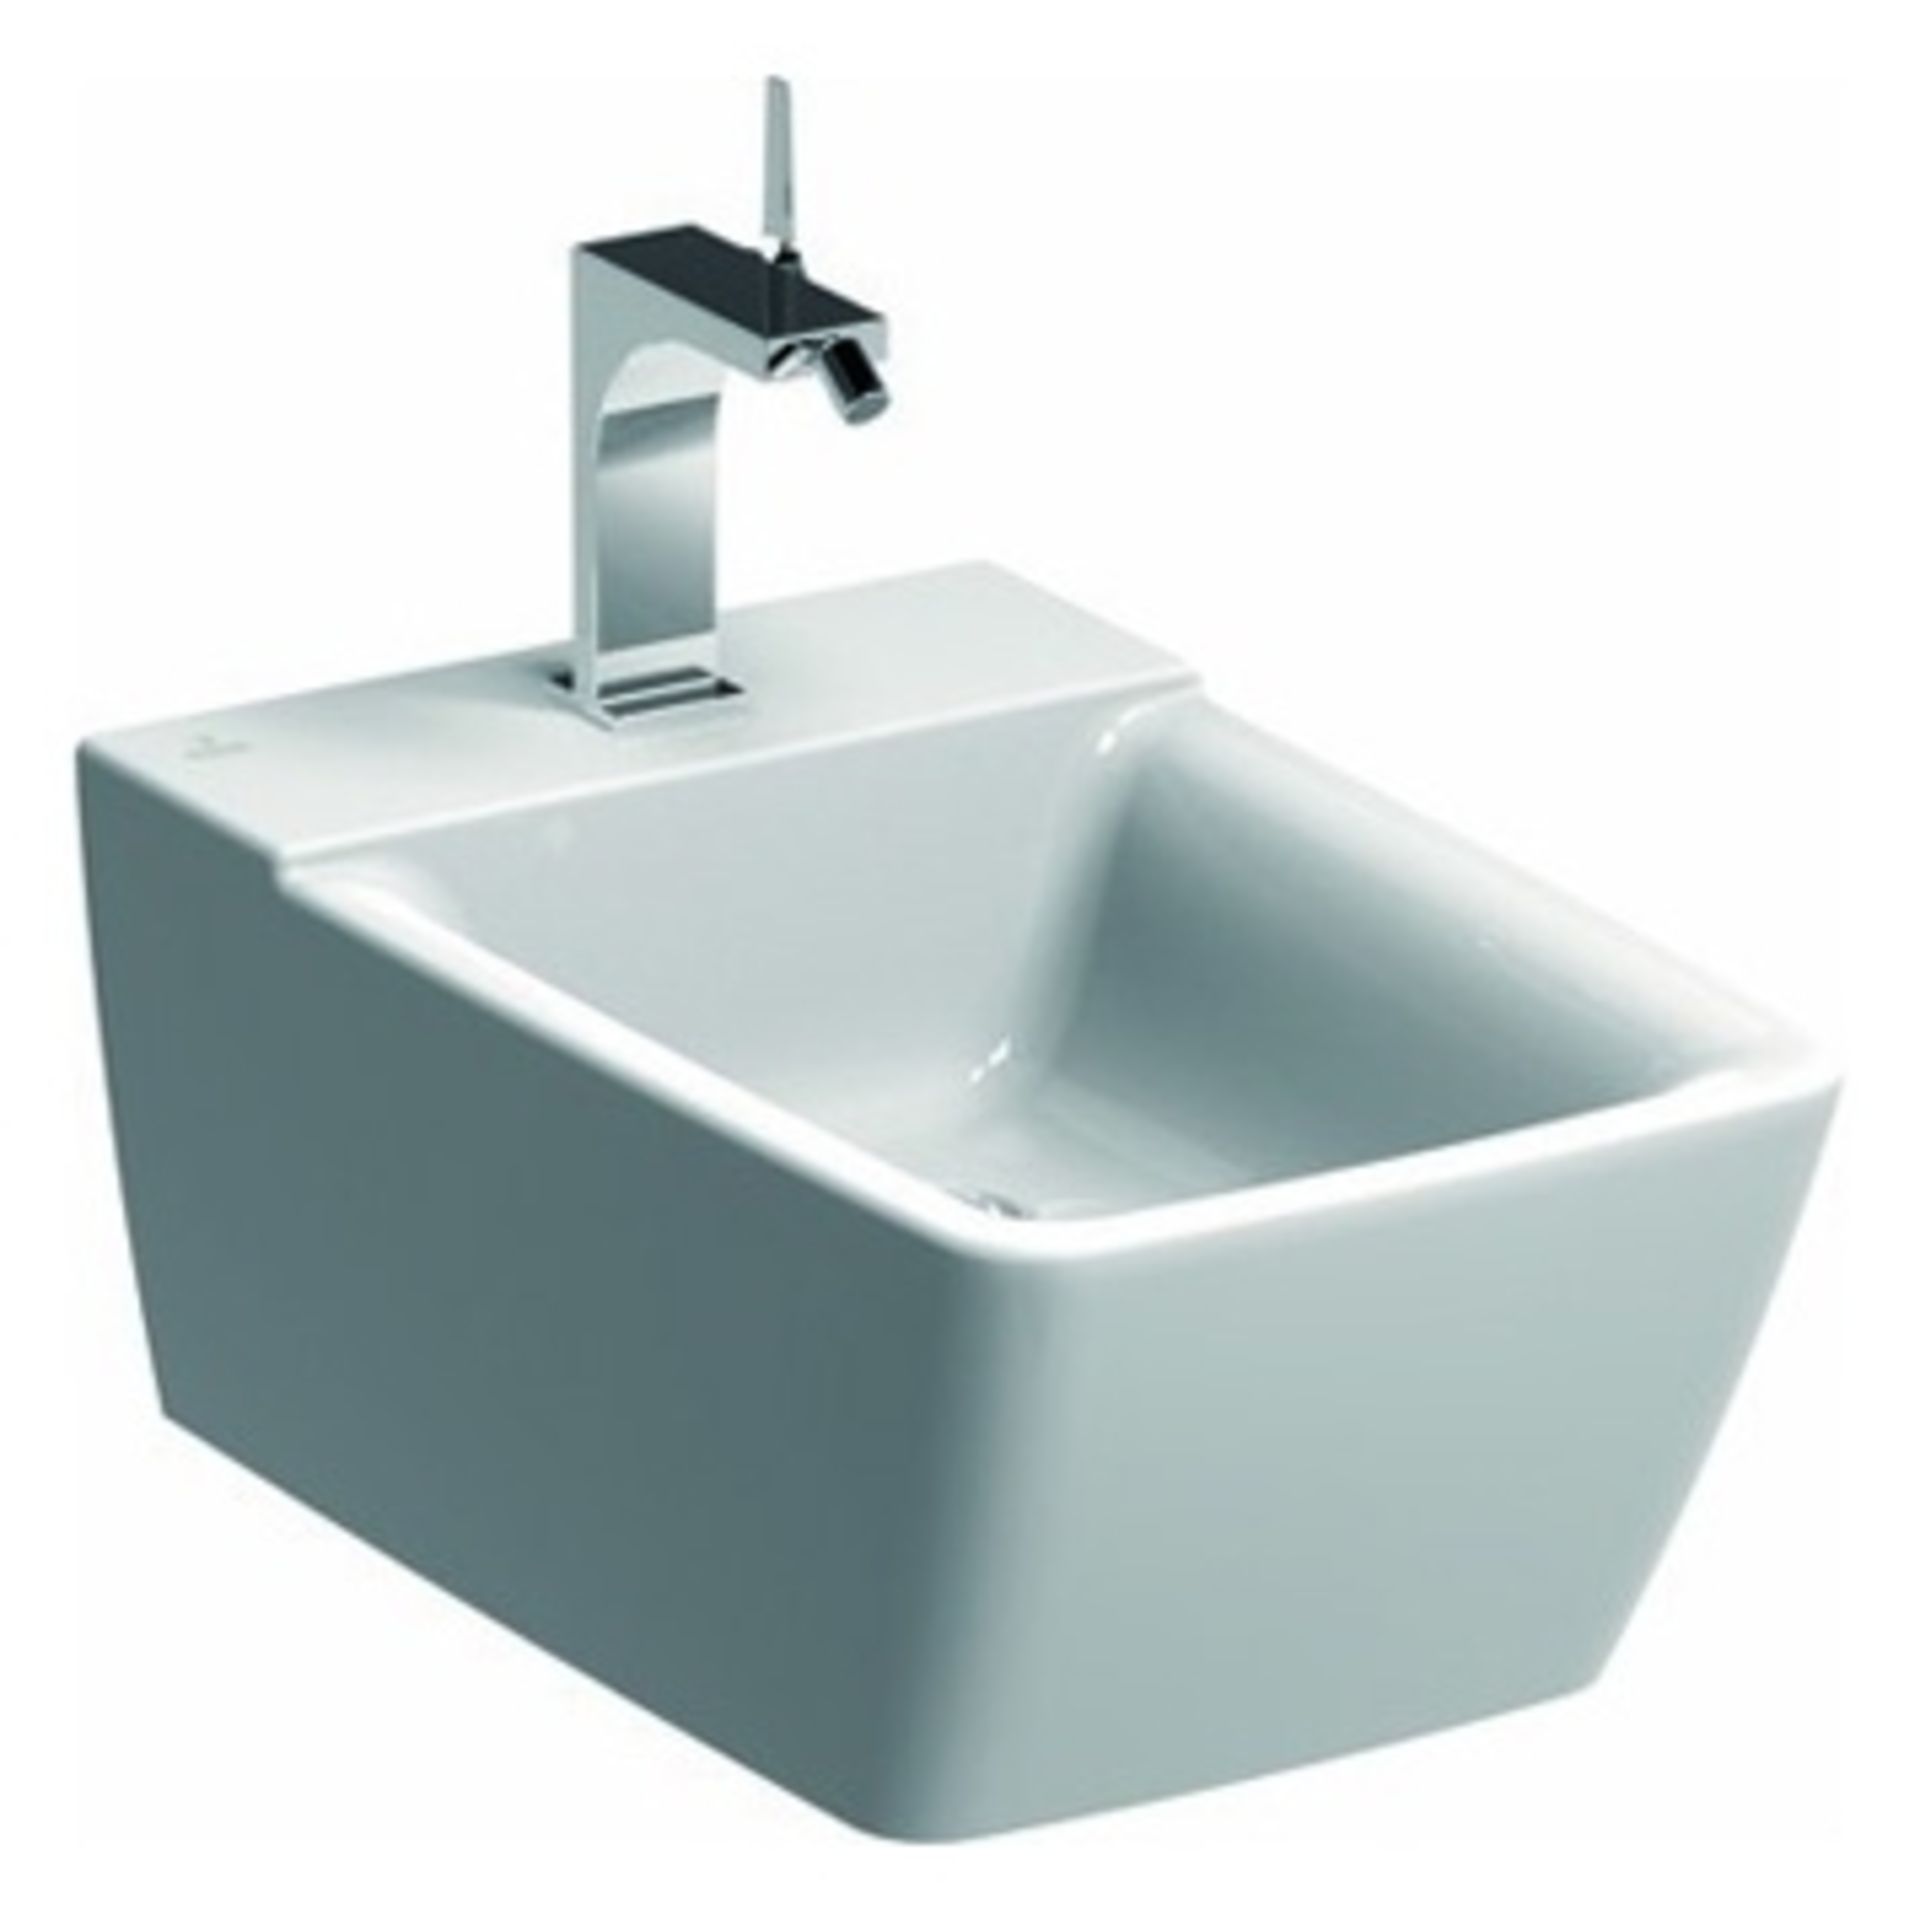 Brand New (XL37) Xeno 540mm Bidet Wall Hung. RRP £389.99. A premium bathroom series of products with - Image 2 of 2